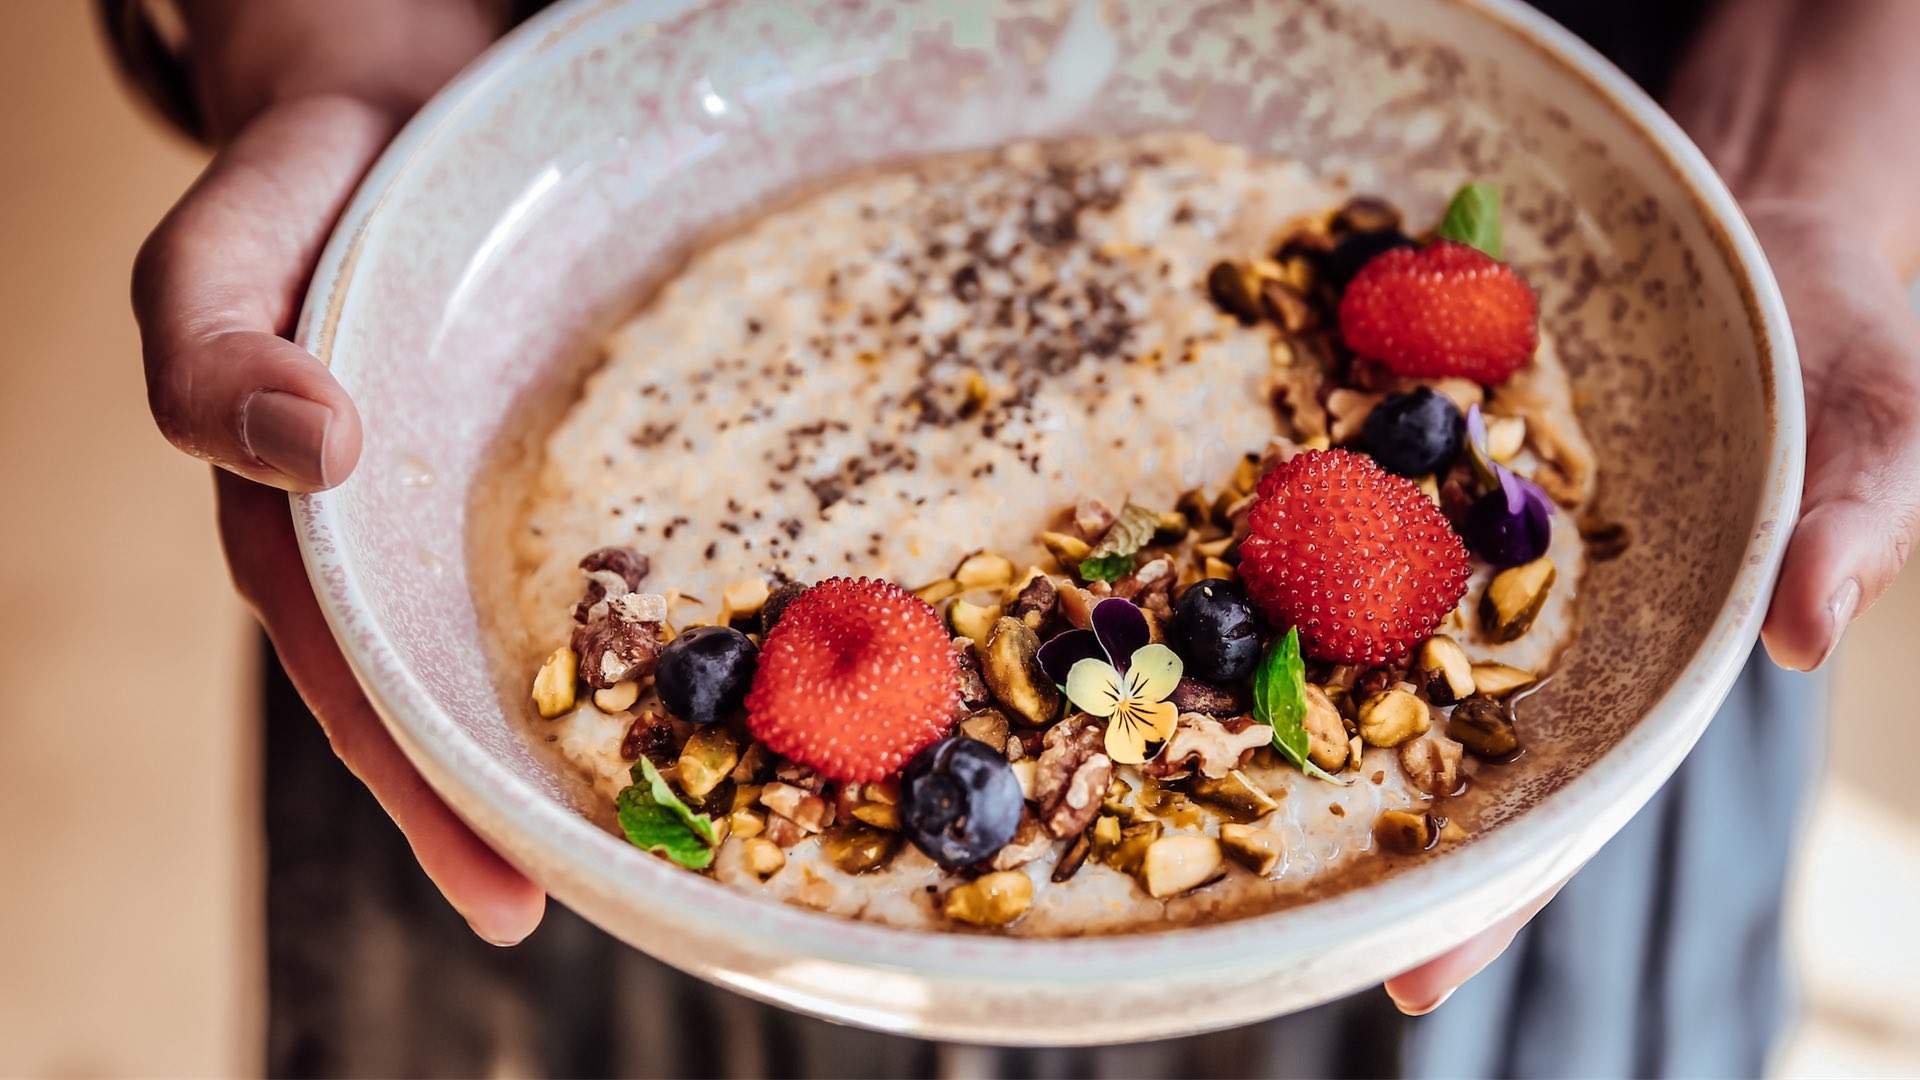 Heart Cafe Is Bondi's New Non-Profit Cafe Serving Up Healthy Brunch Fare and Training Disadvantaged Youth